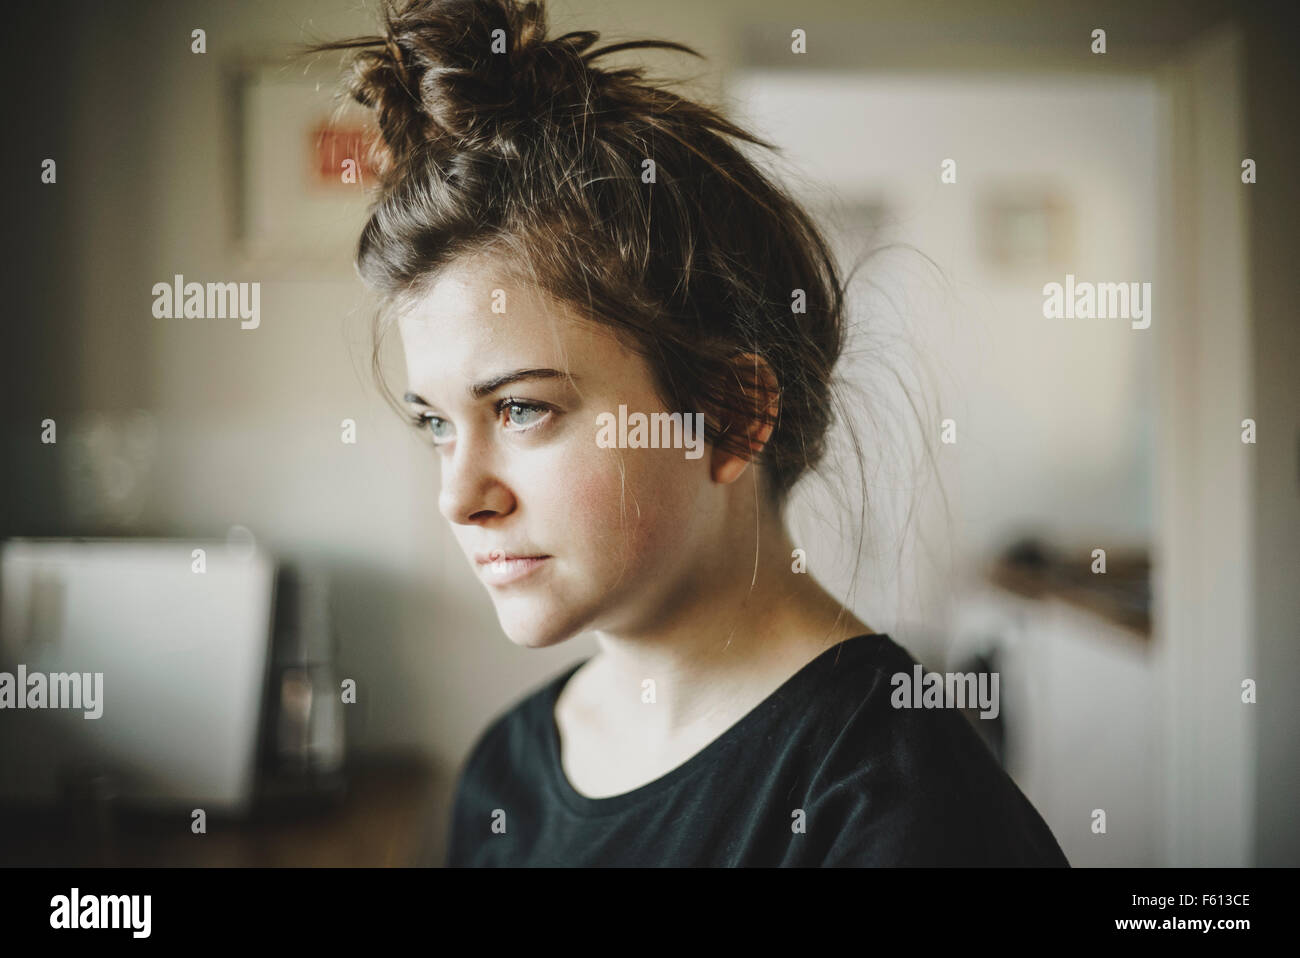 Head and shoulder photograph of a female, caucasian teenager Stock Photo